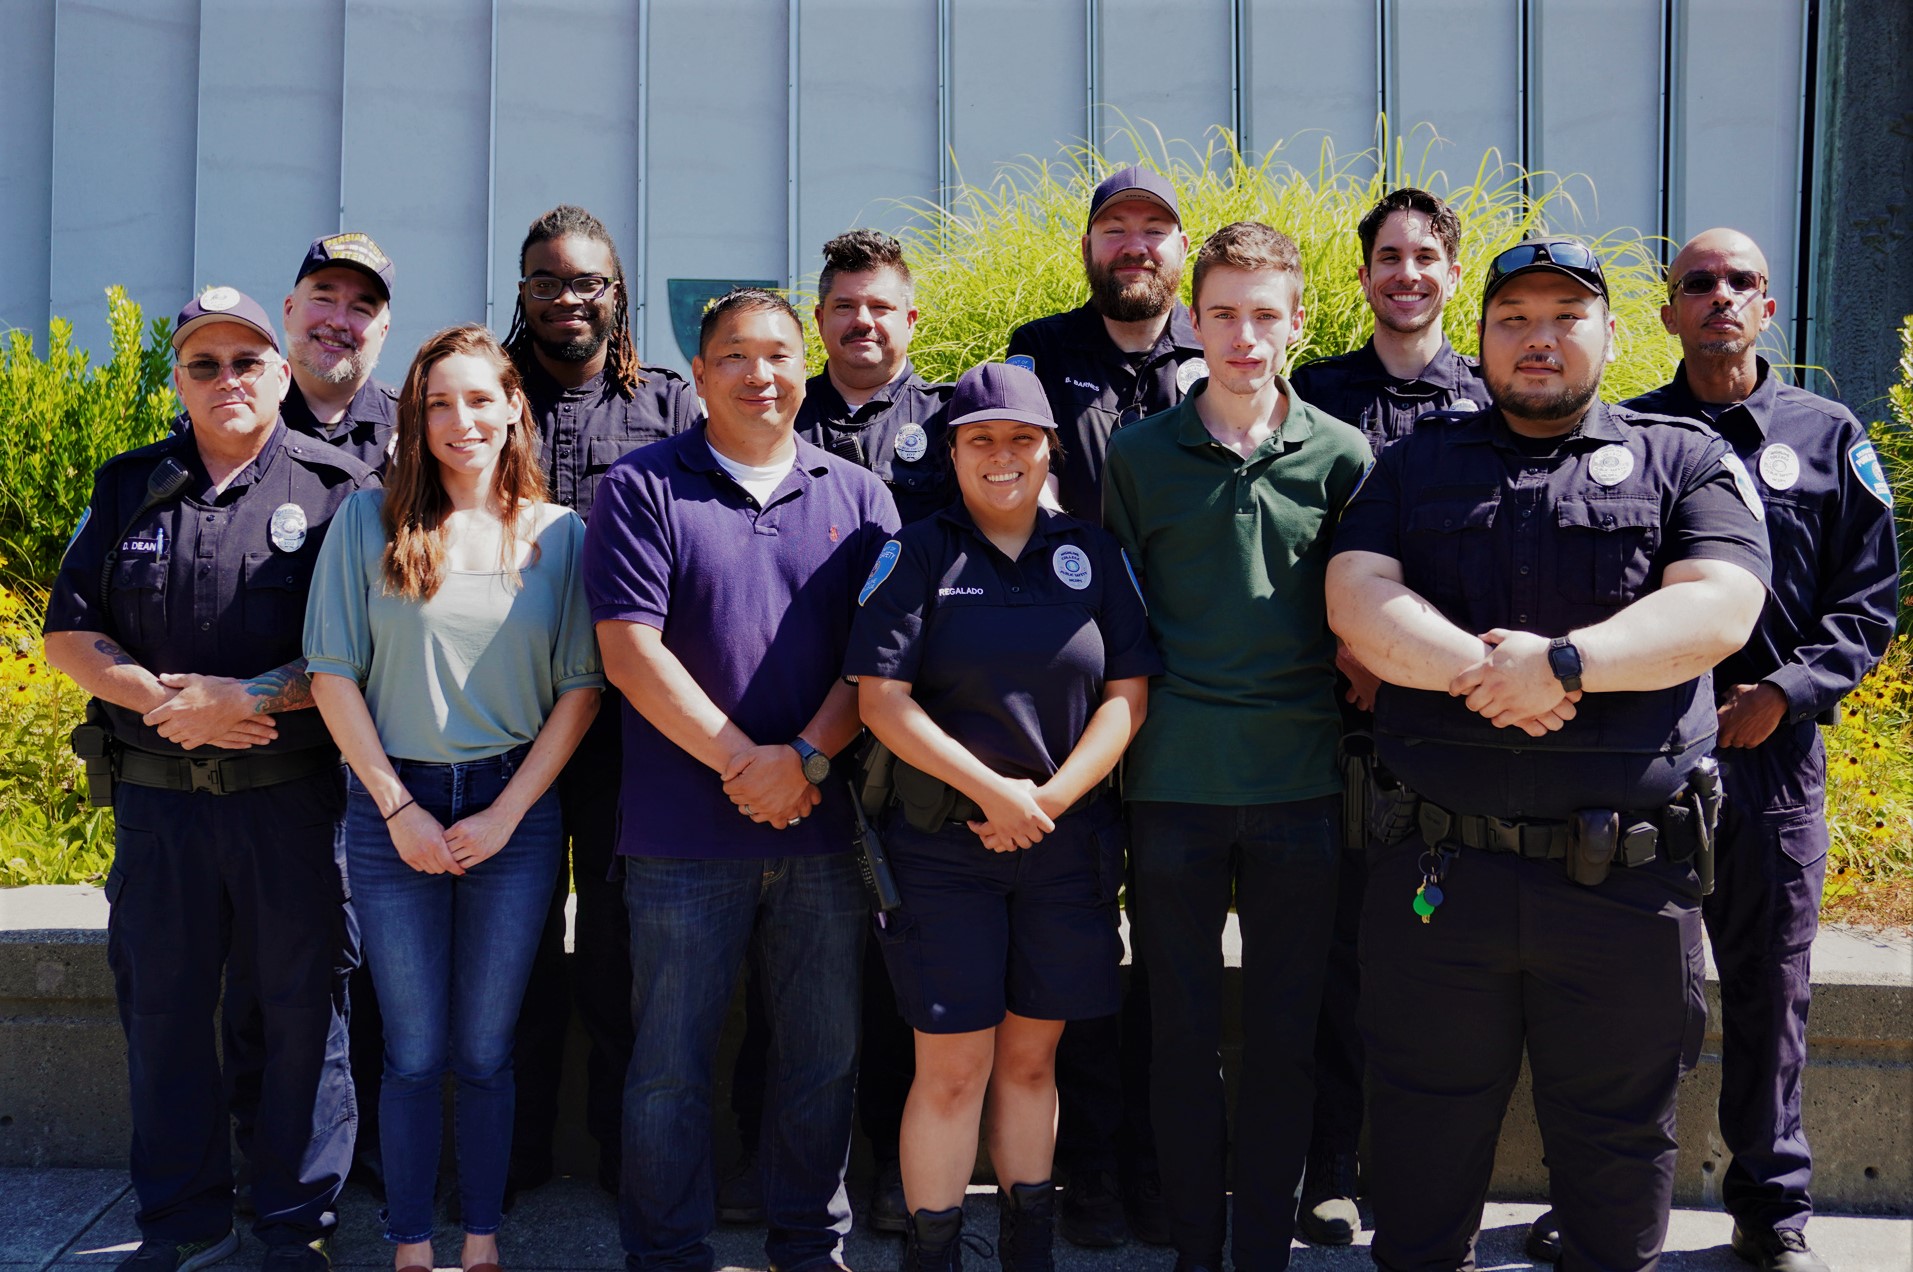 Group photo of the Public Safety team.